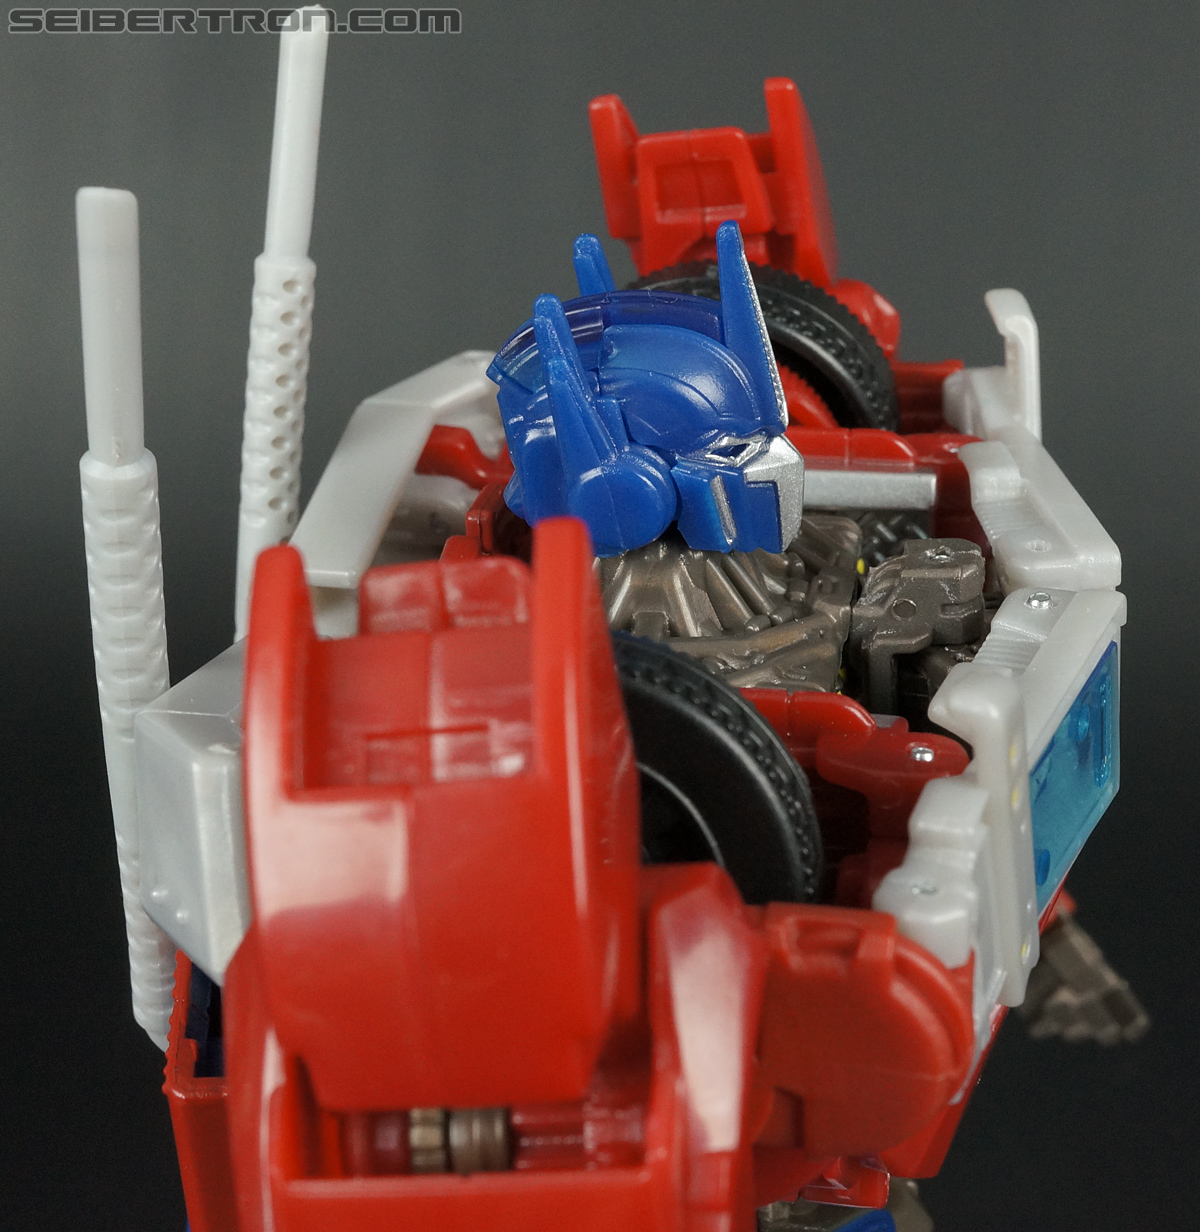 Transformers Prime: First Edition Optimus Prime (Image #85 of 175)